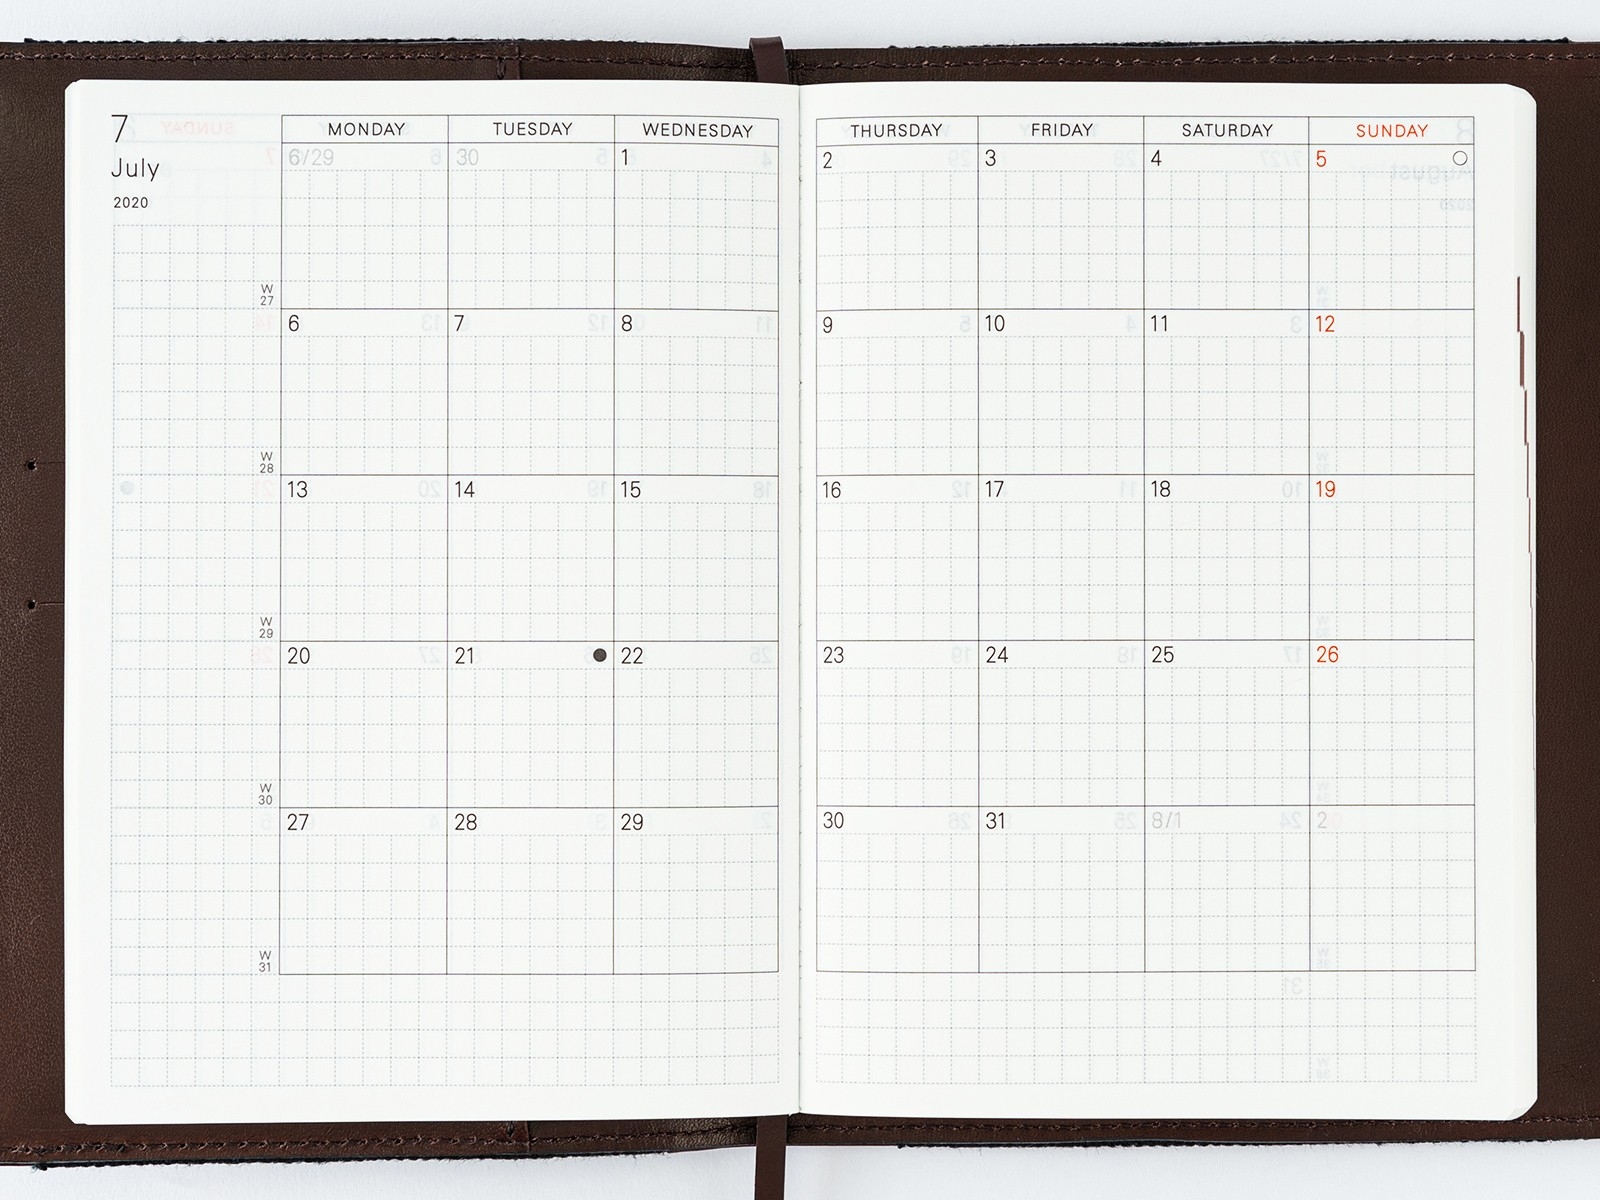 Planner / Monthly Calendar - Book Buying Guide - Hobonichi-Monthly Calendar With Time Slots 2020